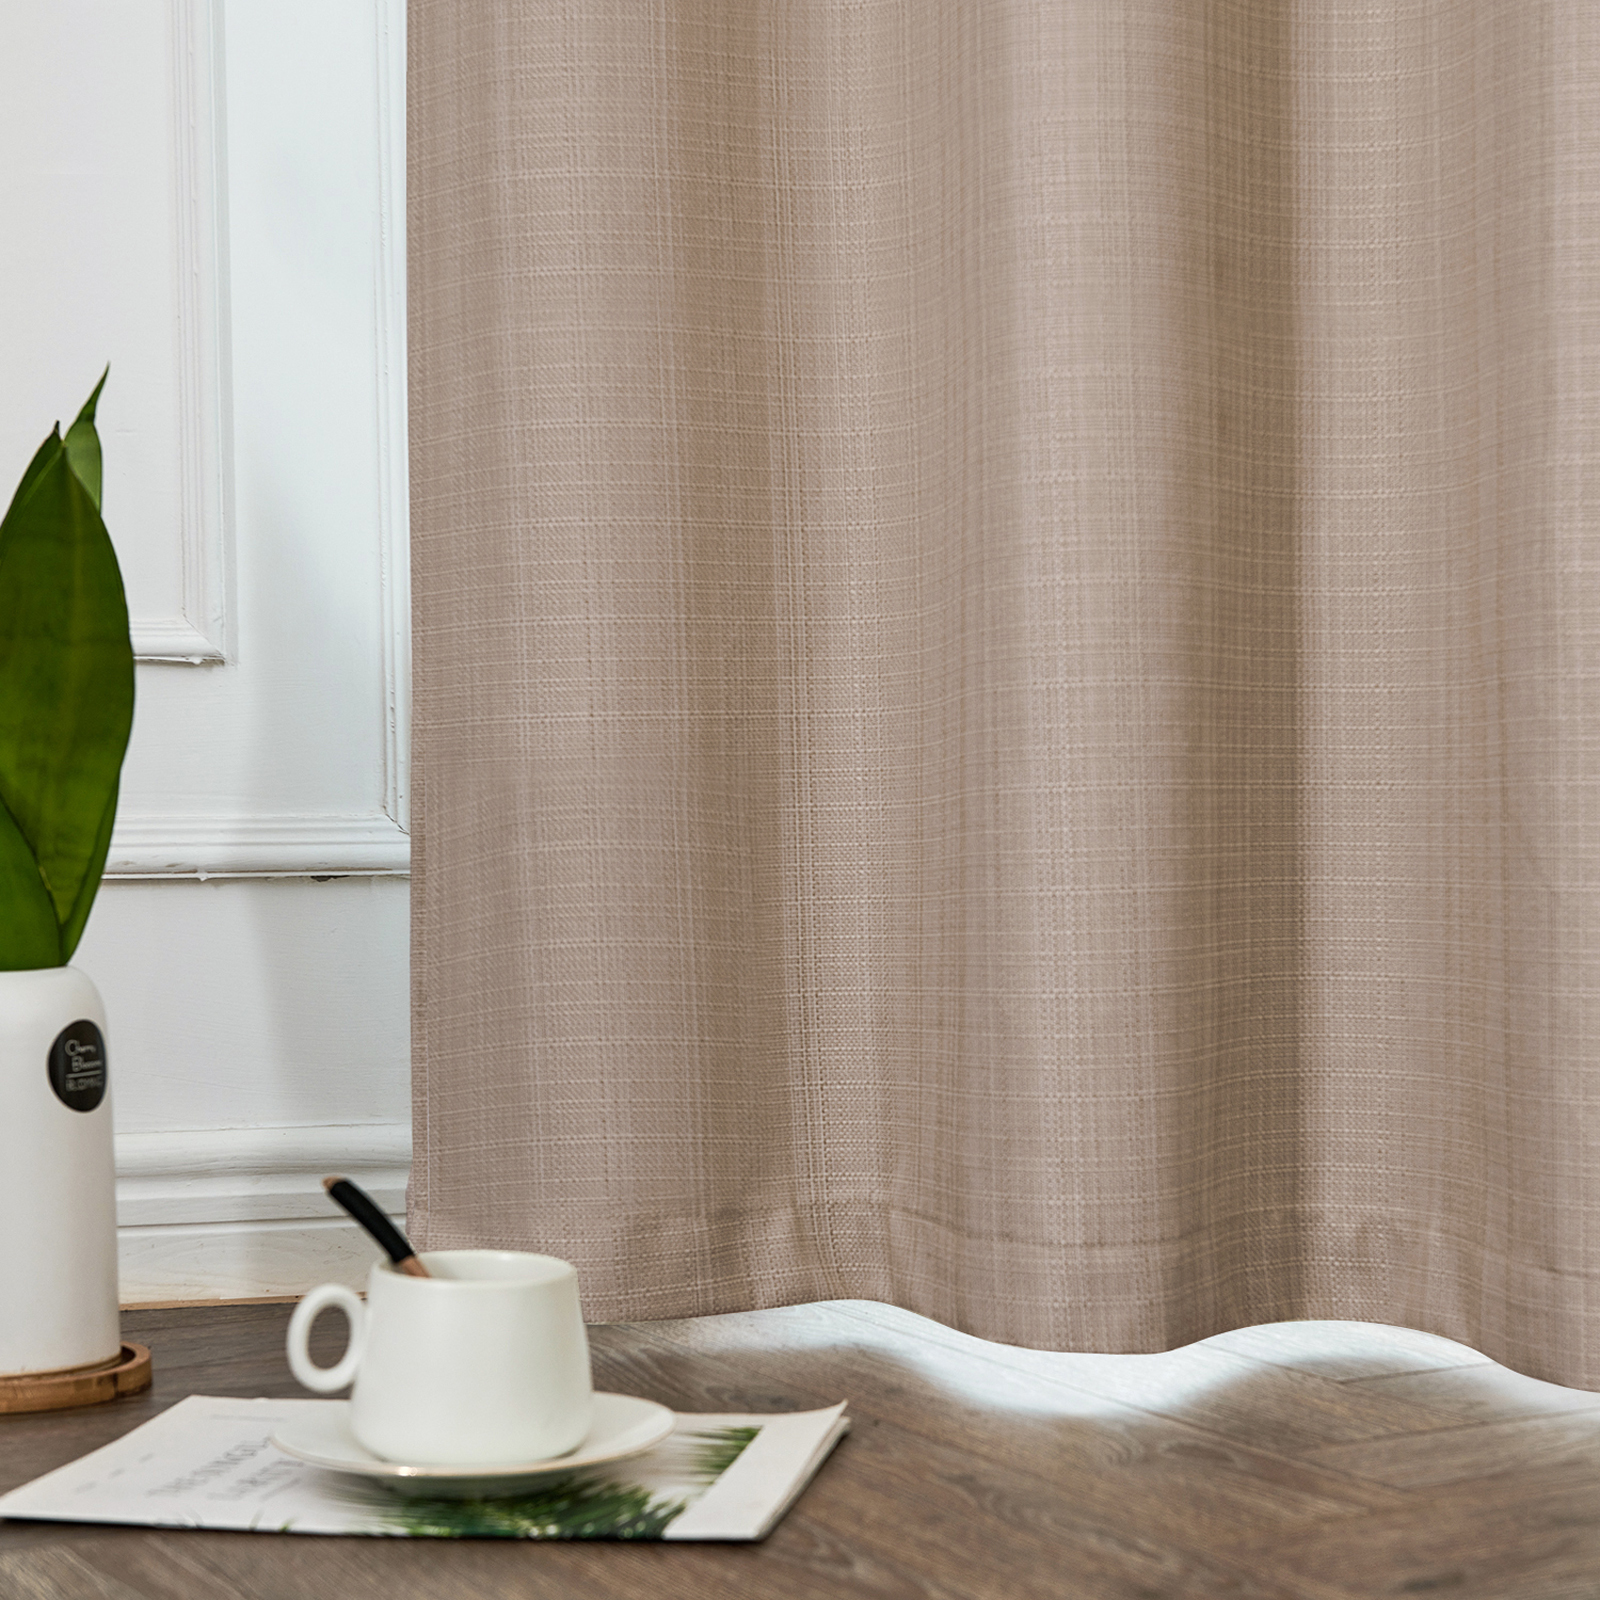 Curtainking Taupe Curtains for Living Room 63 inches Linen Textured Curtains Light Filtering Back Tab Curtains Casual Weave Back Tab Drapes 2 Panels - image 4 of 8